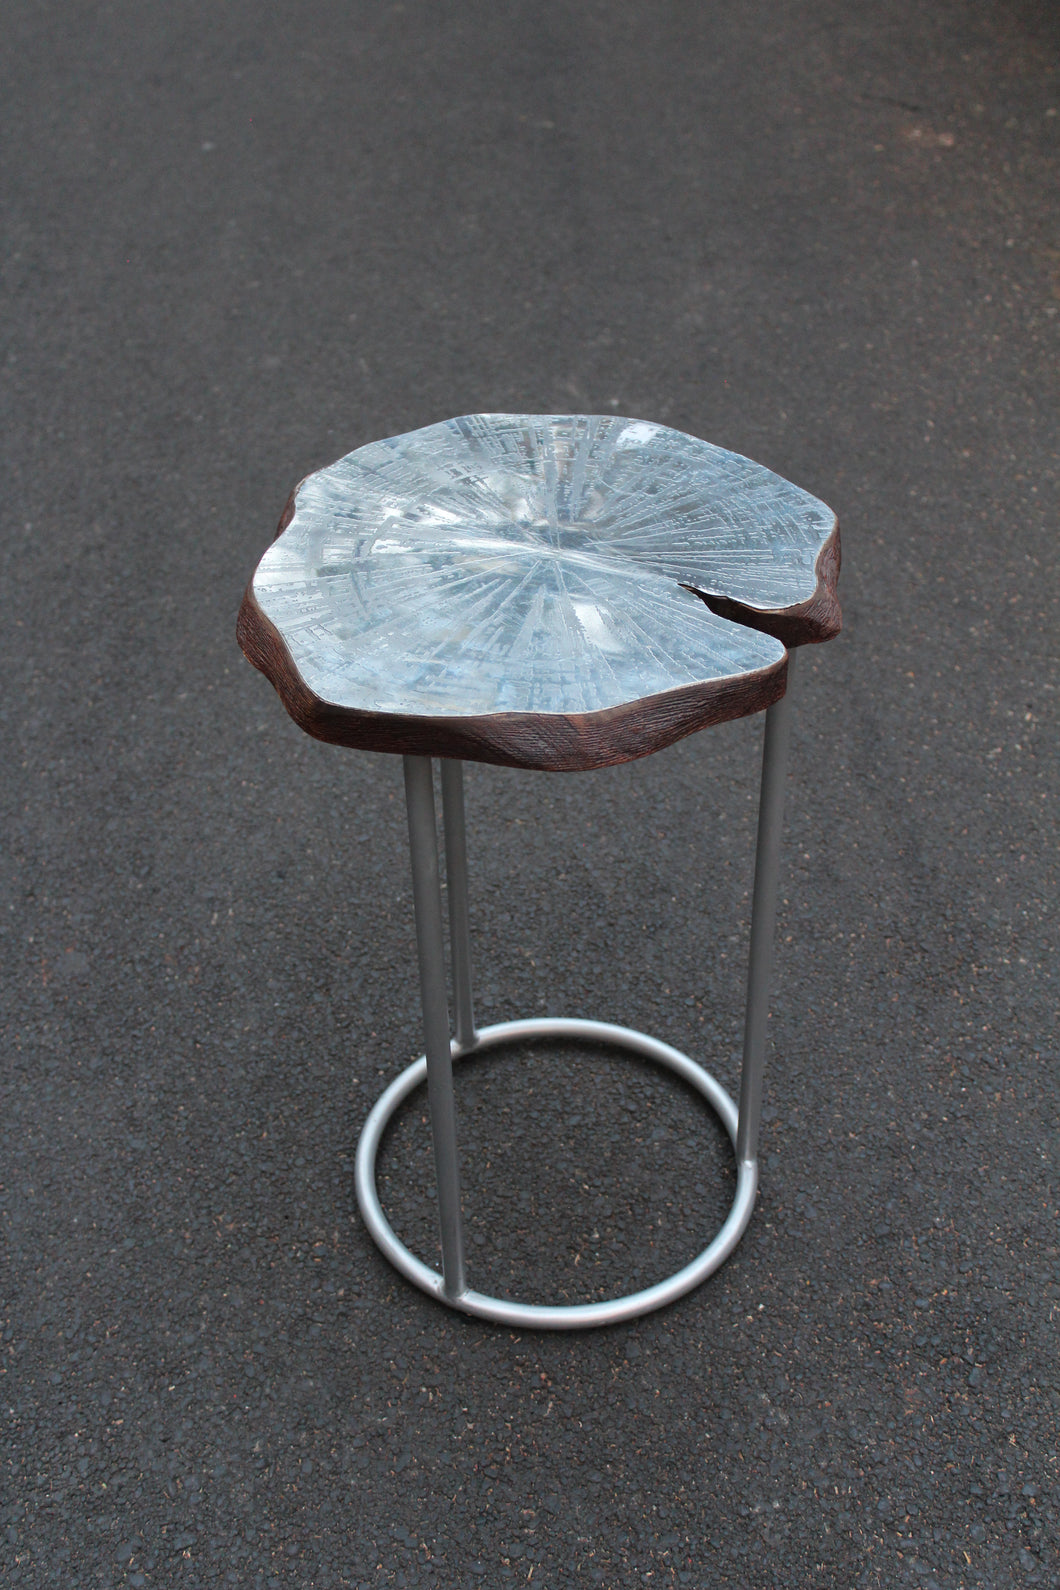 Wood Slice Table With Metal Top